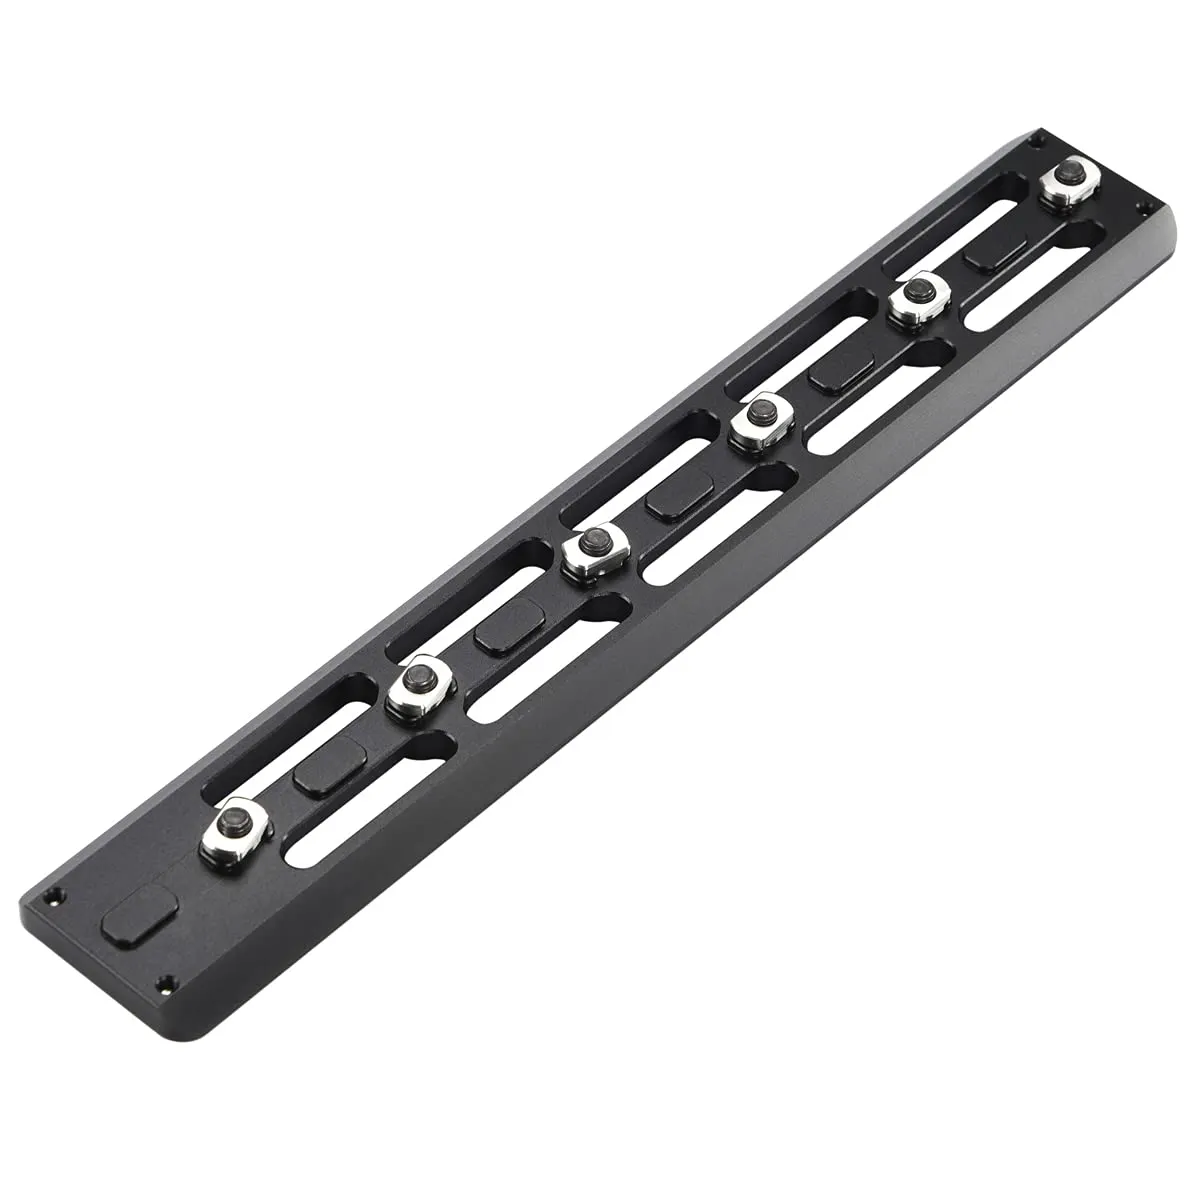 Anodized Aluminum Arca Rail Plate System Mount 6 Slots Interface for Hunting Tripod Adapter Gun Clamp